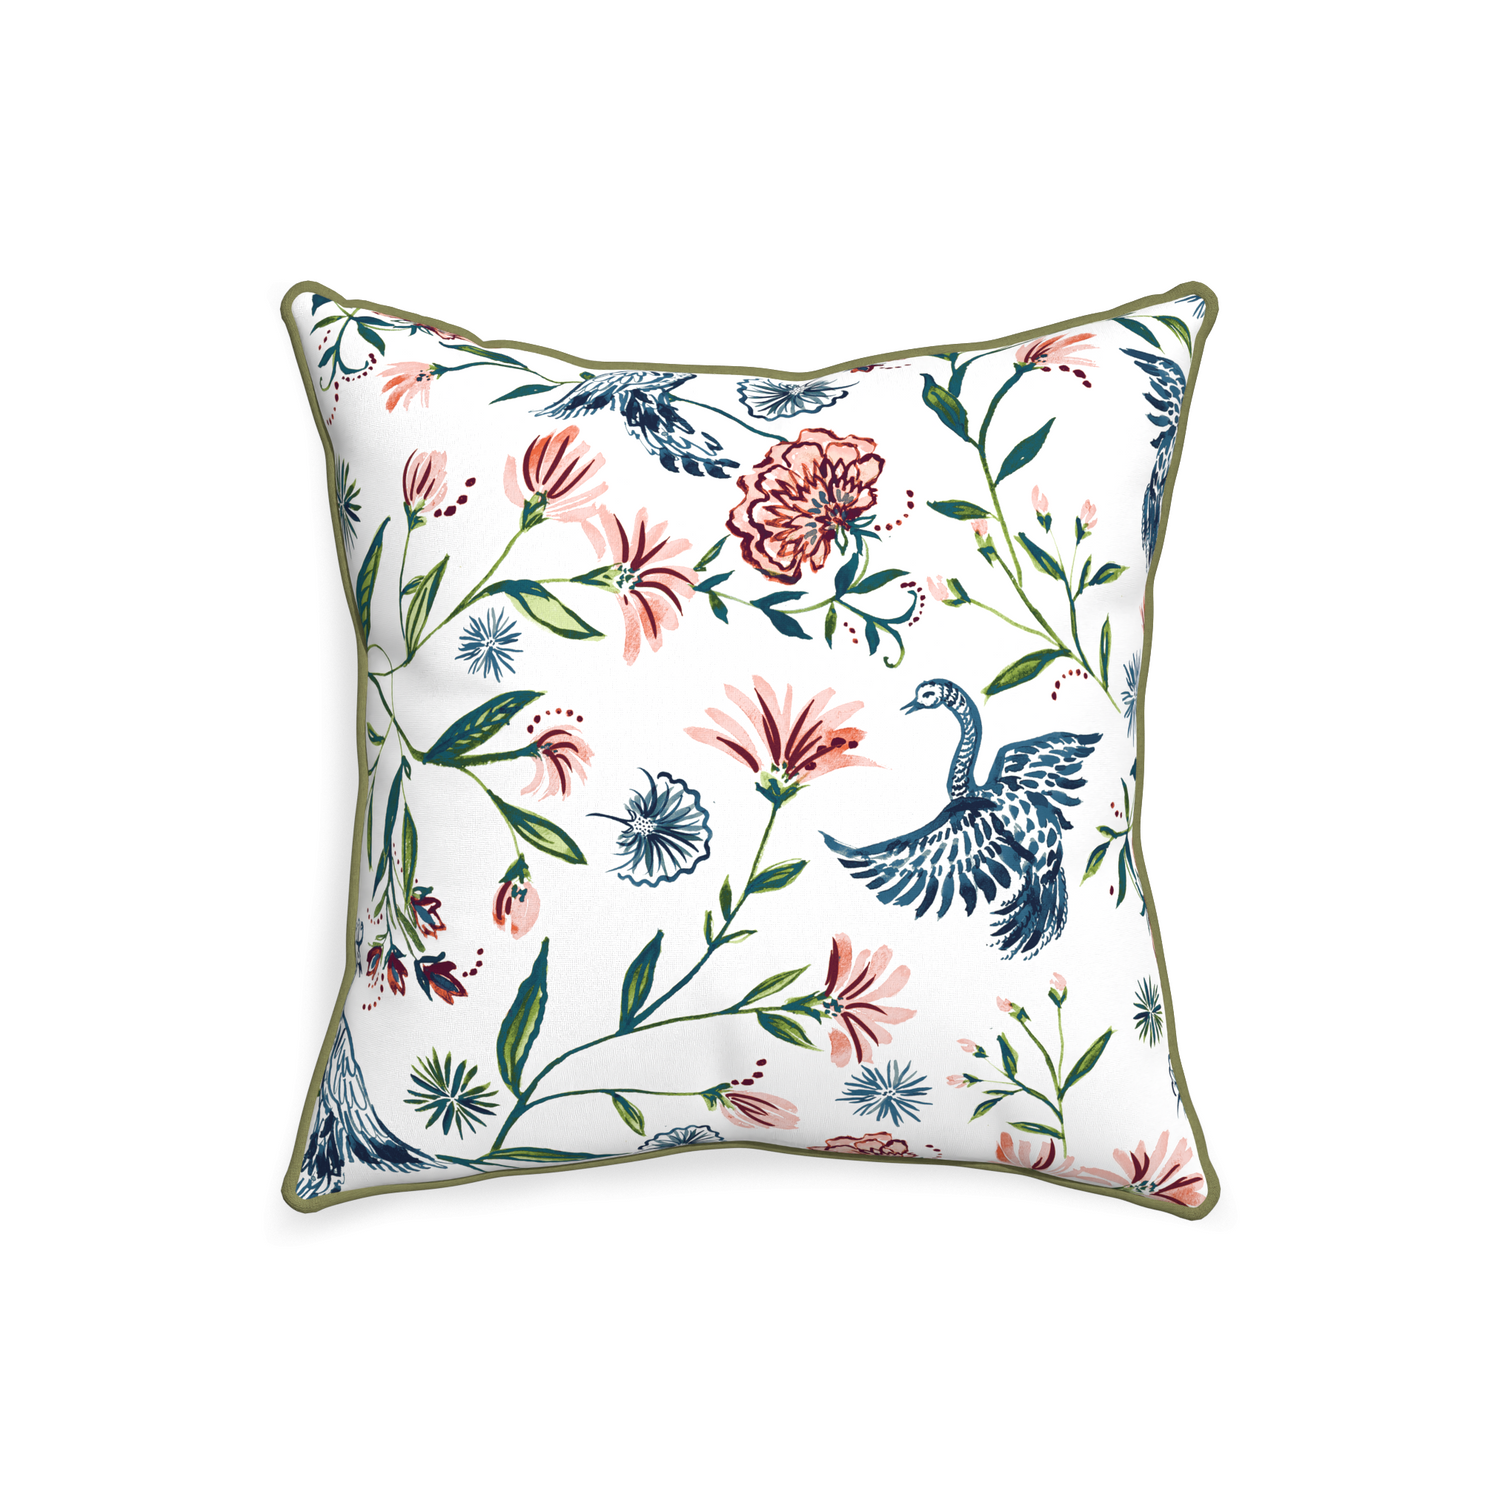 20-square daphne cream custom pillow with moss piping on white background